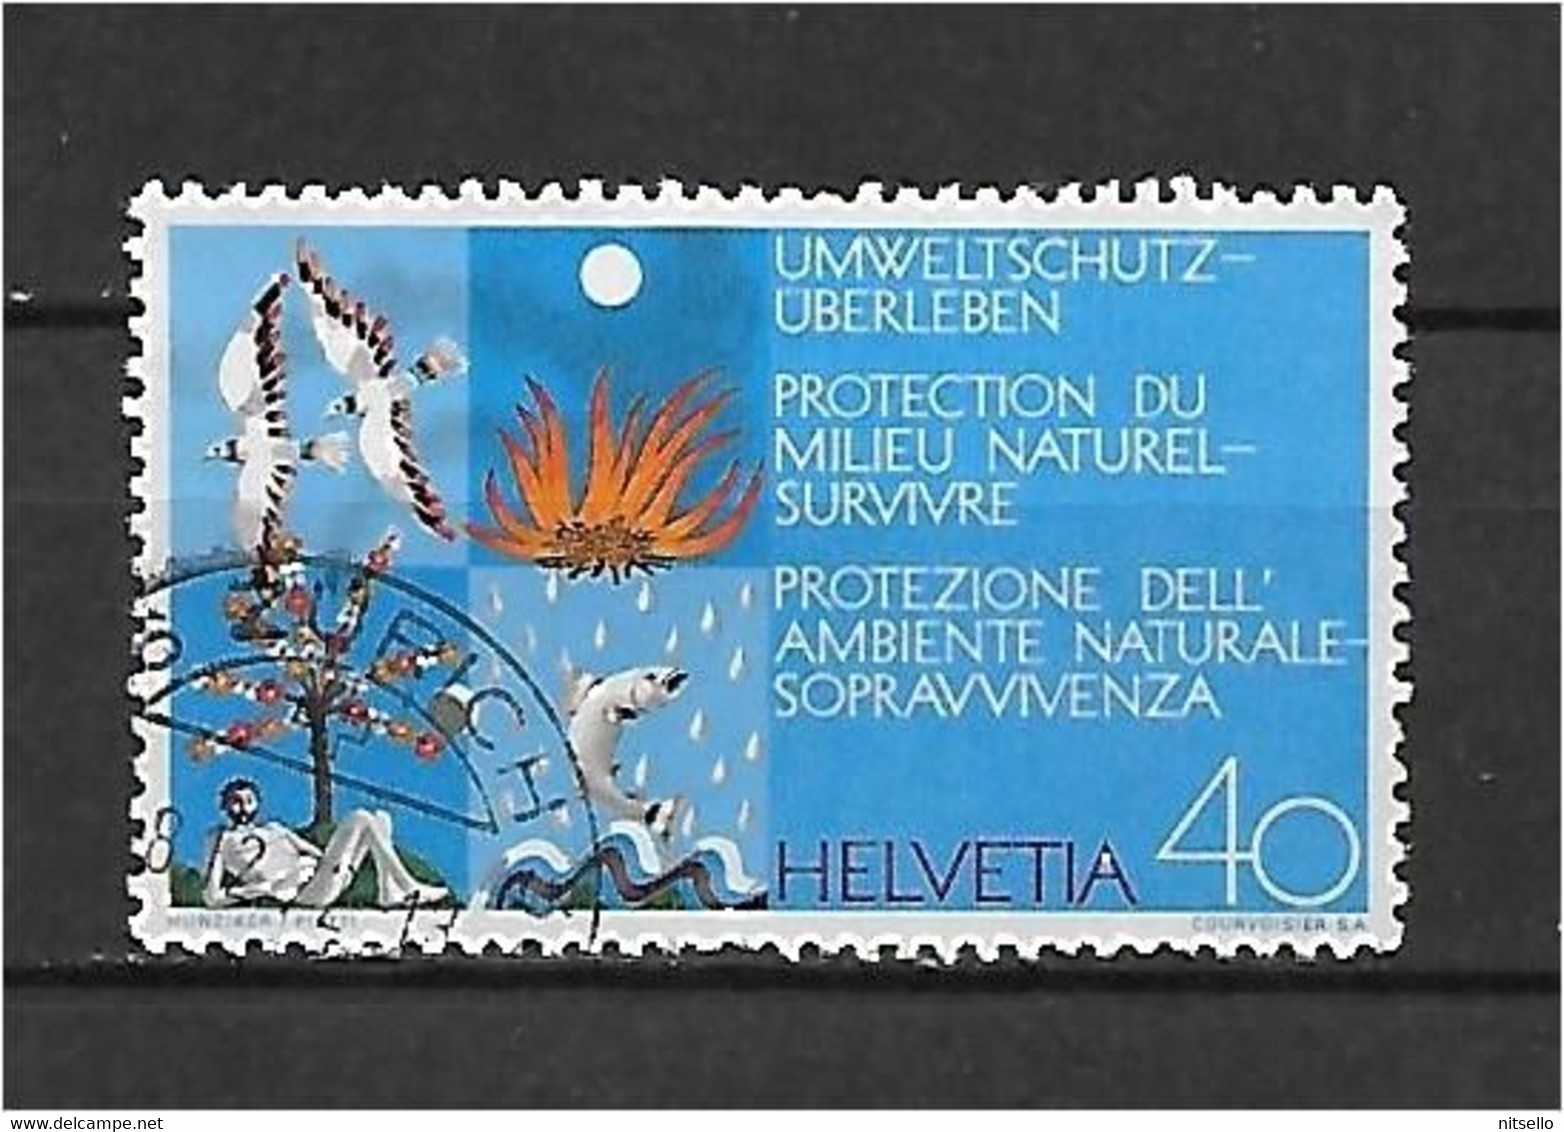 LOTE 1530  ///  SUIZA   YVERT Nº:908  ¡¡¡ OFERTA - LIQUIDATION - JE LIQUIDE !!! - Used Stamps